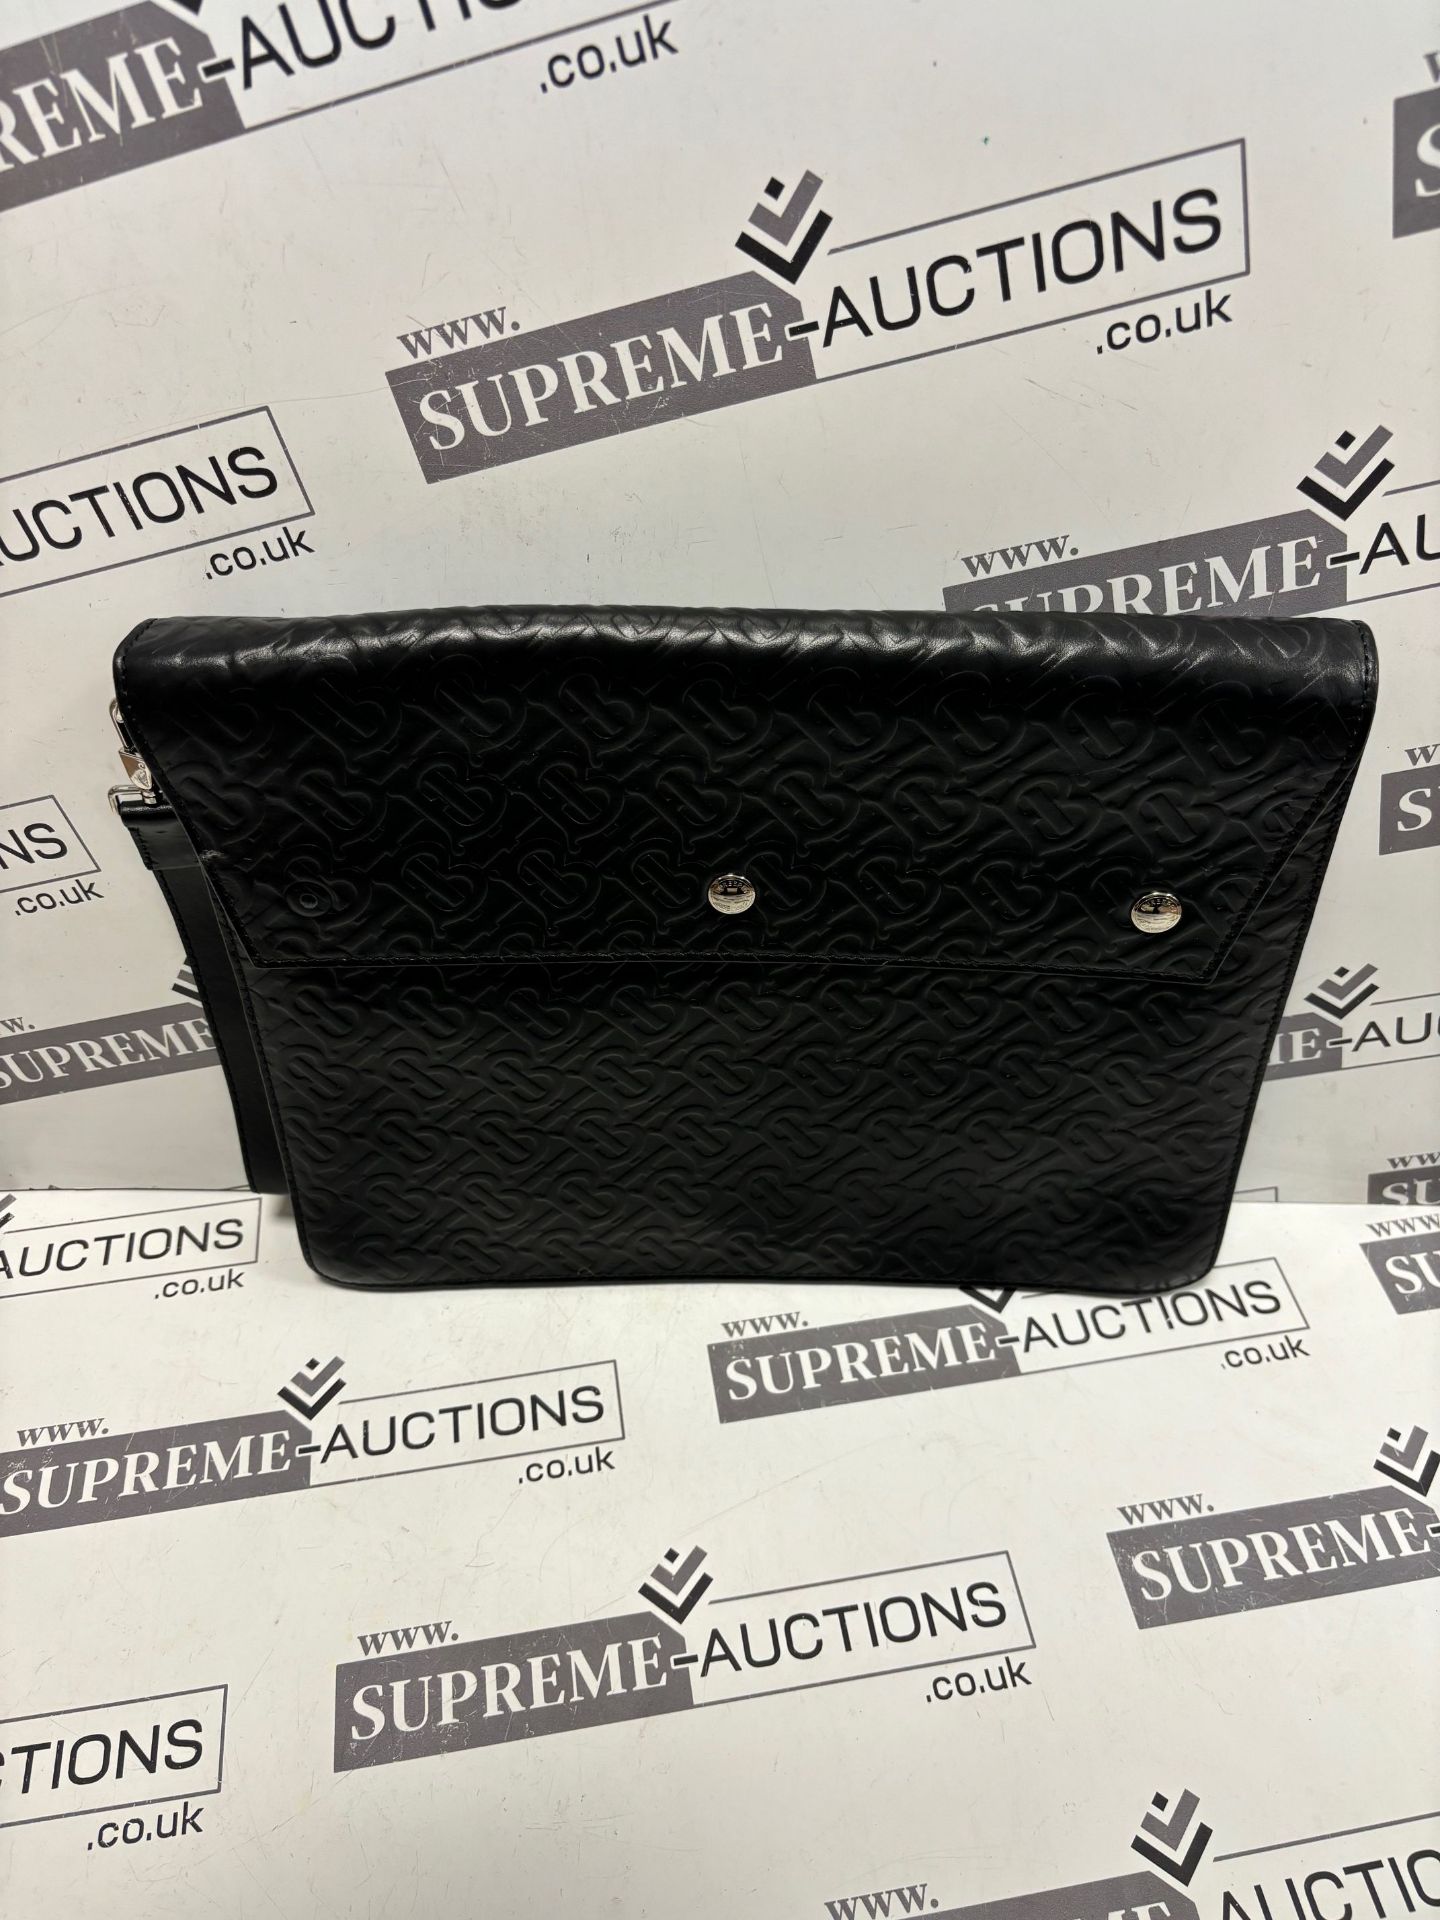 (No Vat) Burberry Envelope clutch, TB embossed leather, Black colour approx 27x35cm. - Image 2 of 7